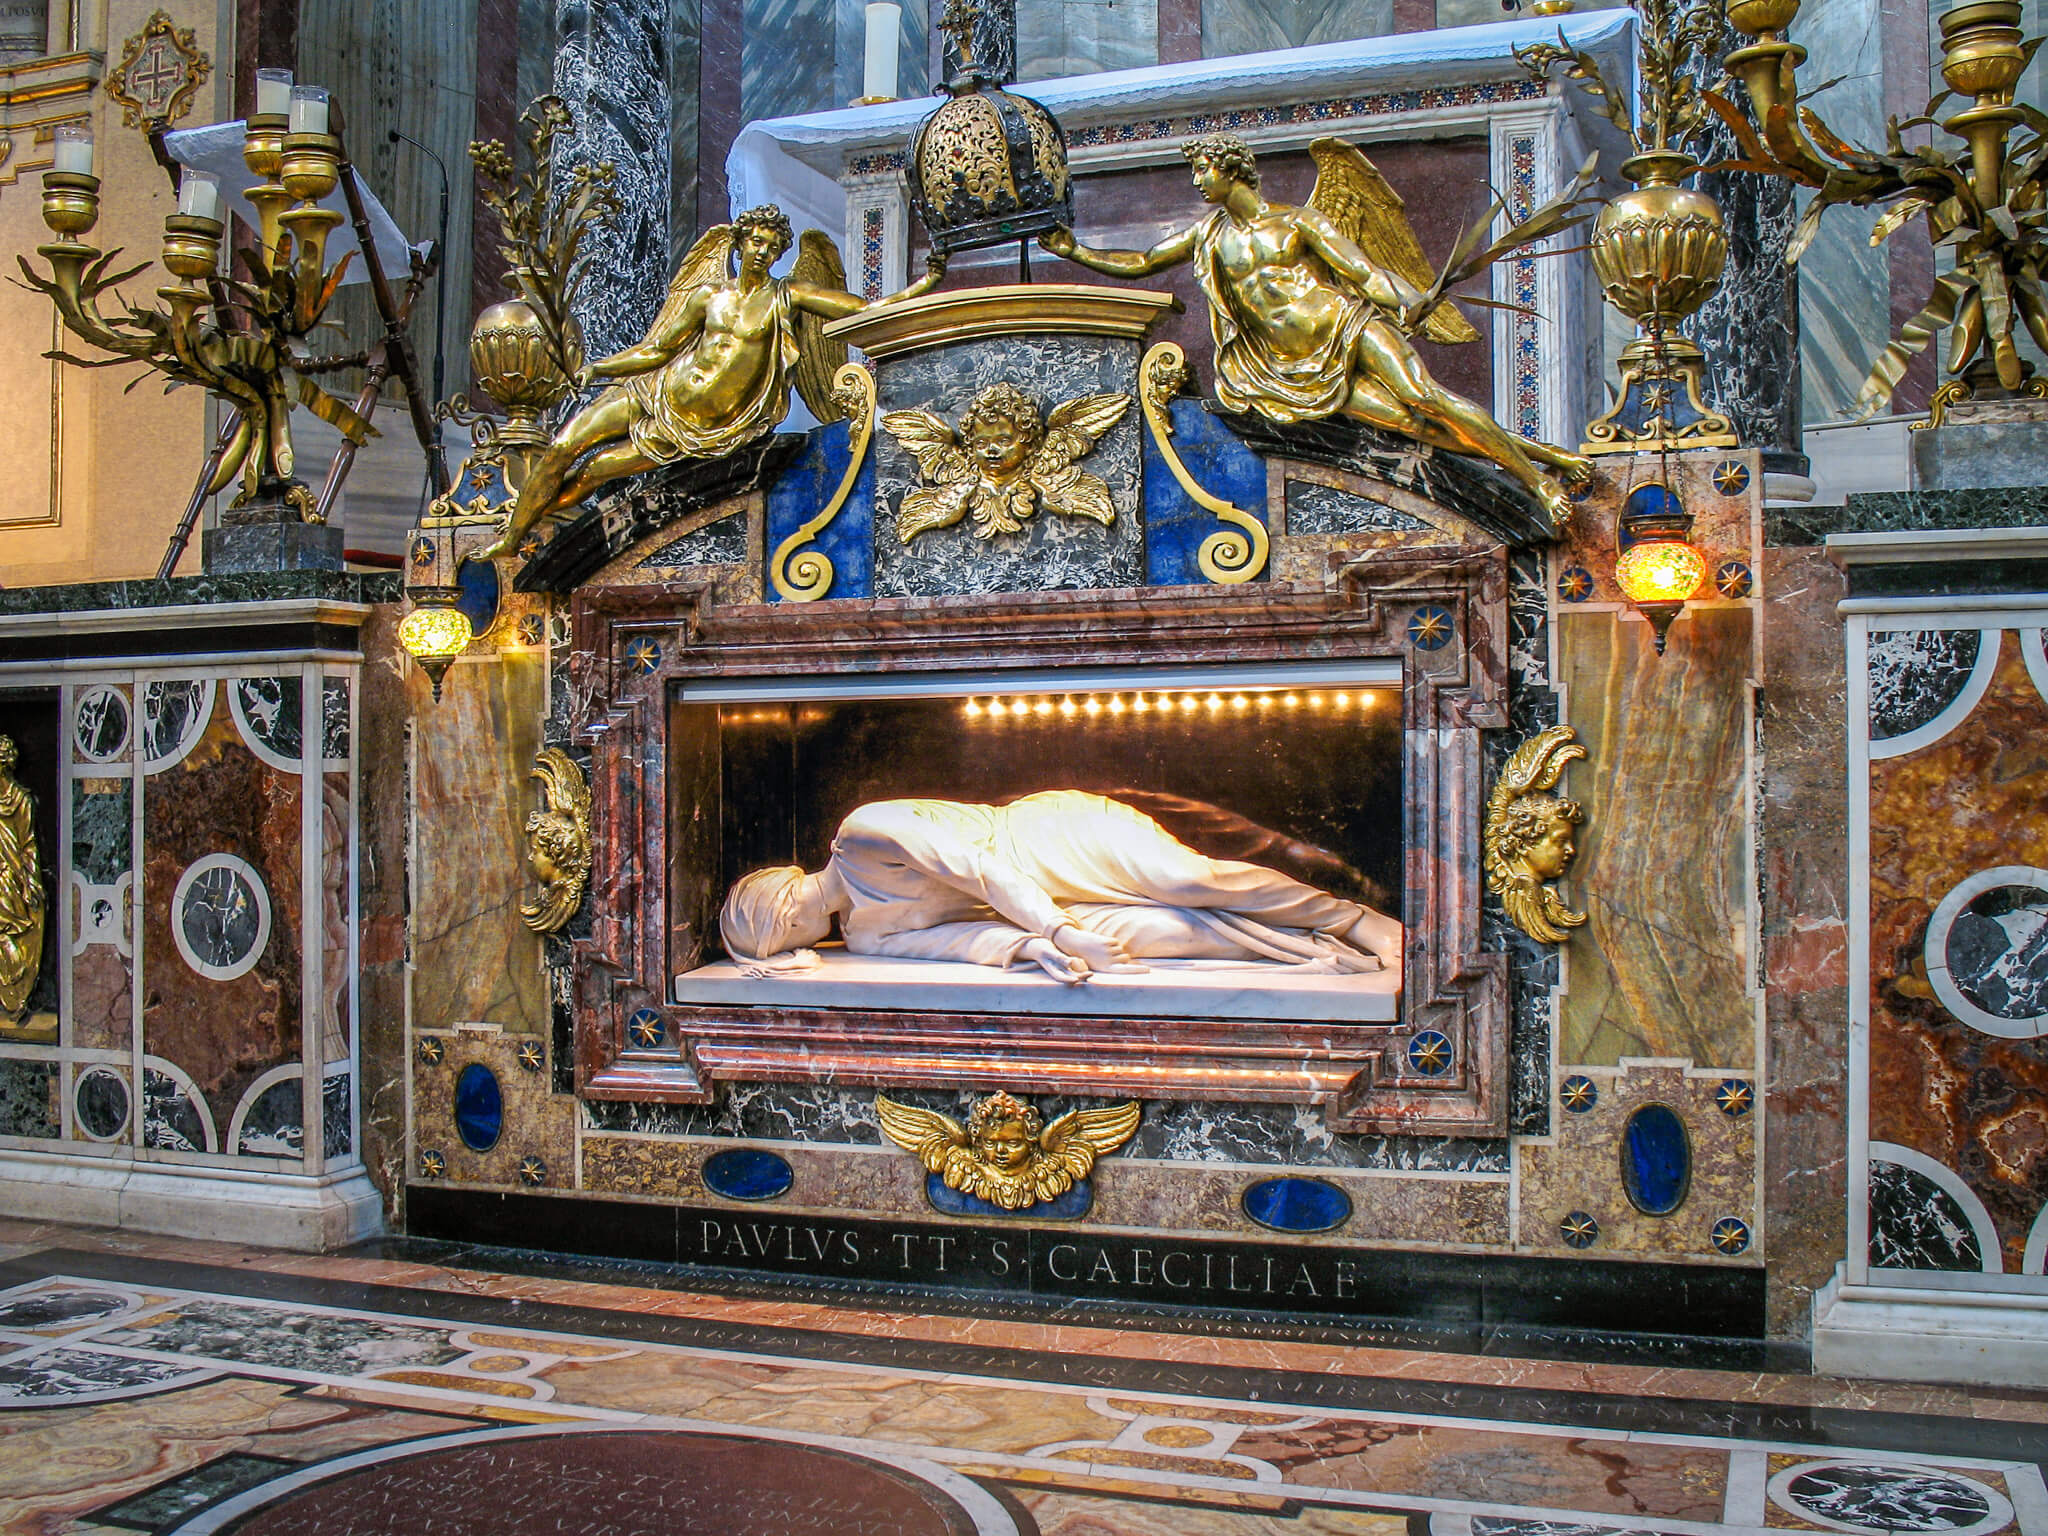 Maderno's early Baroque sculpture of Saint Cecilia